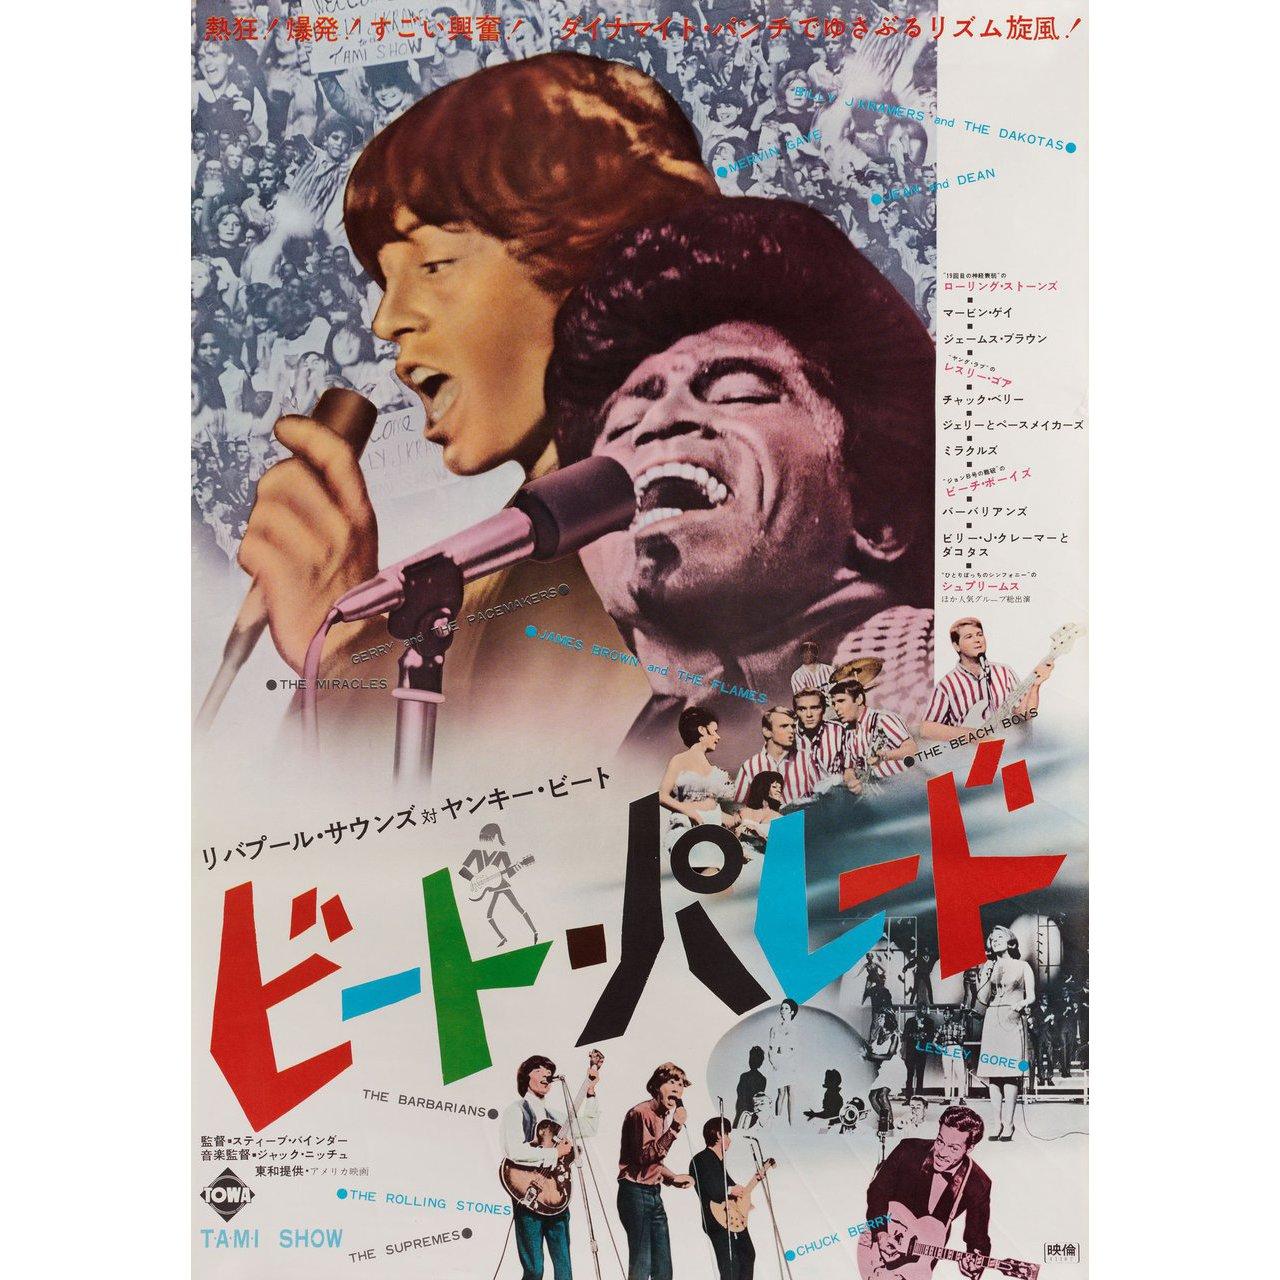 Original 1966 Japanese B2 poster for the first Japanese theatrical release of the documentary film The T.A.M.I. Show directed by Steve Binder with The Beach Boys / The Barbarians / Chuck Berry / The Blossoms / The Rolling Stones / Diana Ross. Very